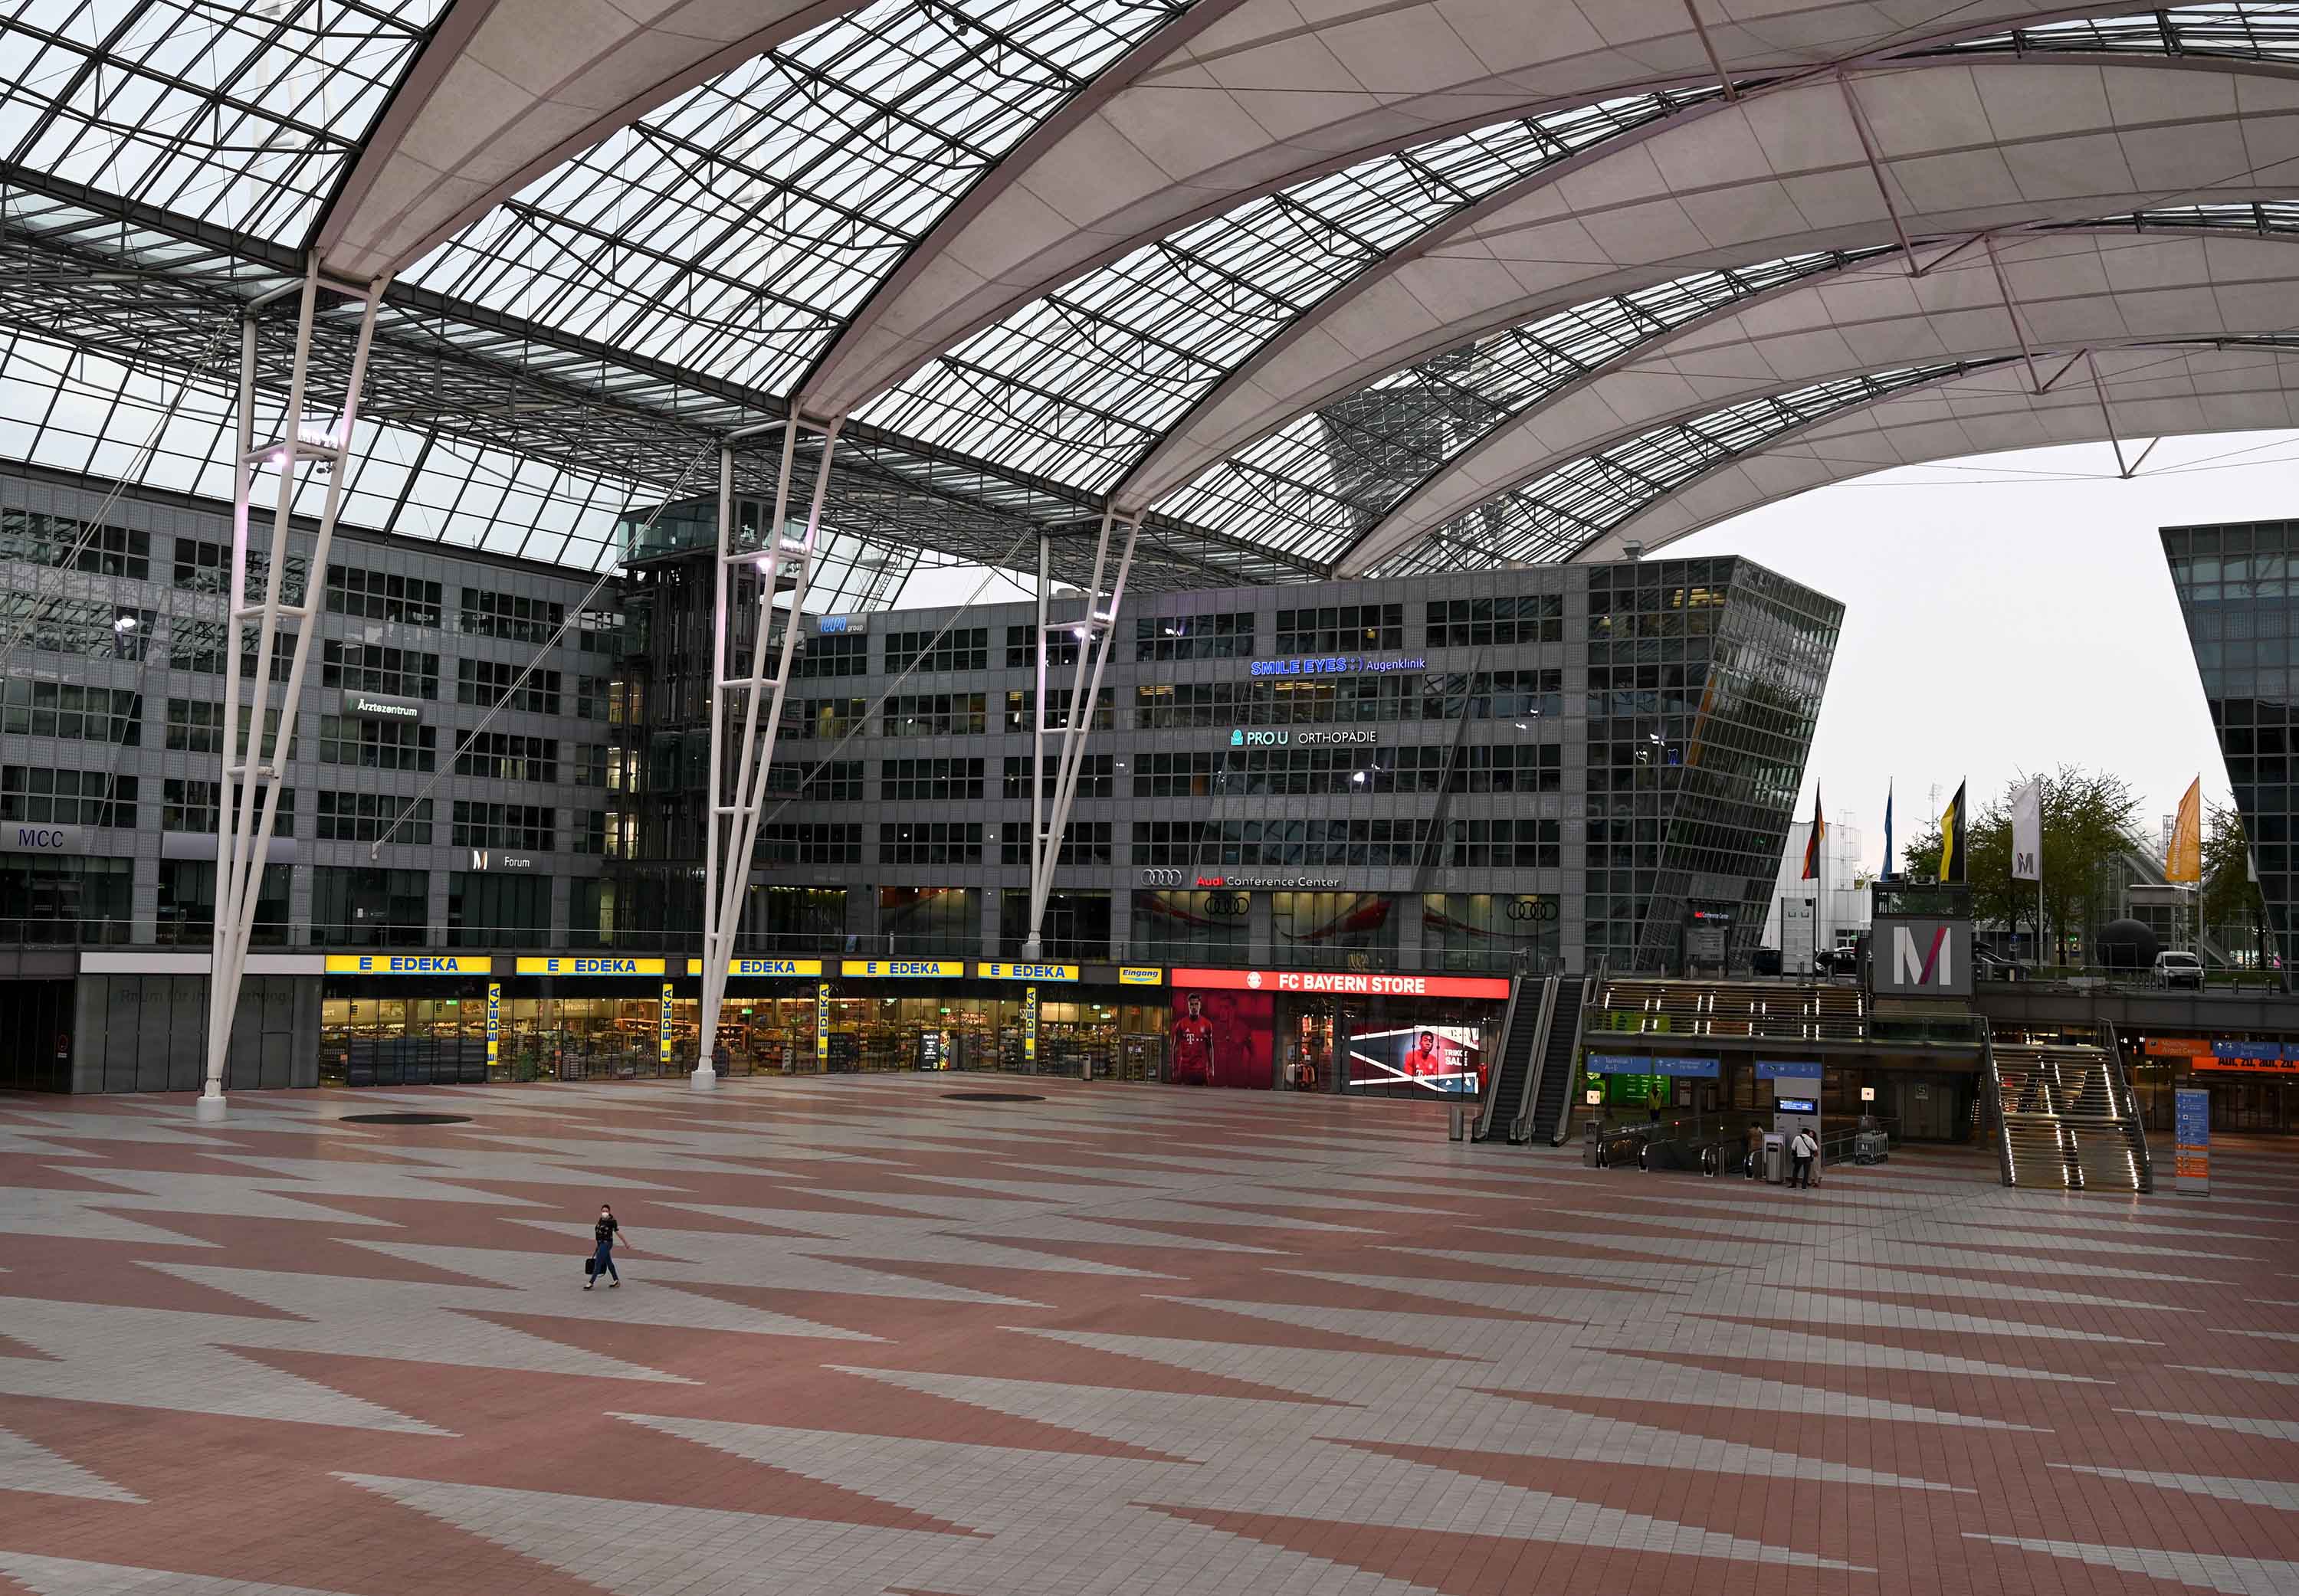 The Franz-Josef-Strauss airport is pictured in Munich, Germany, on April 28.